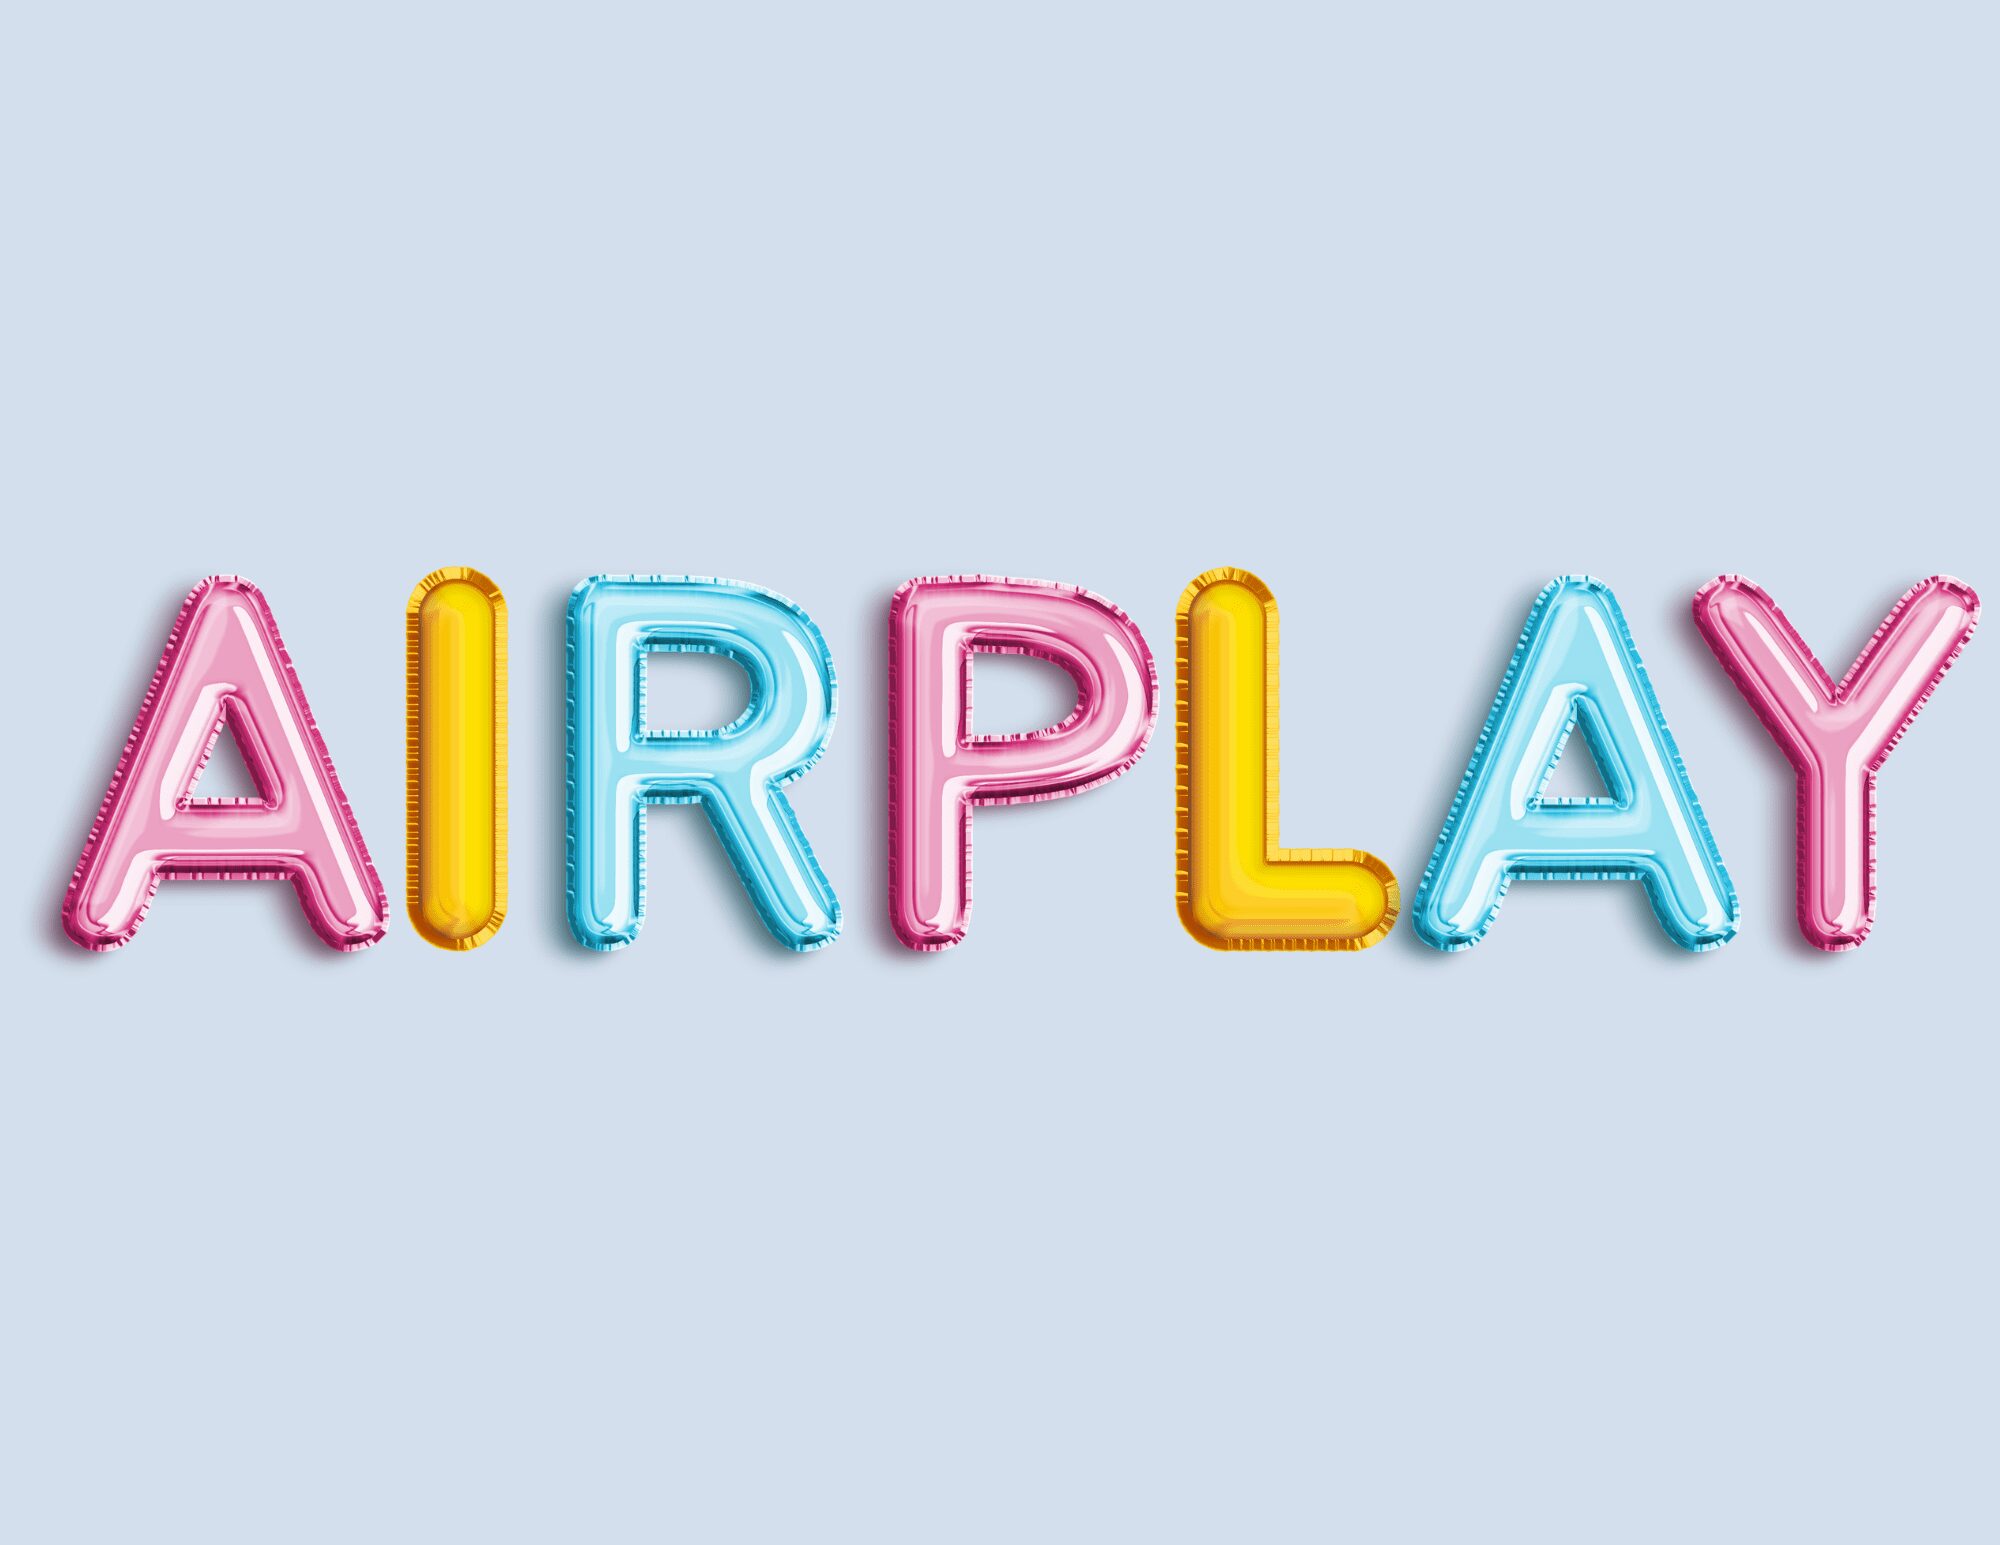 airplay spelled in colorful balloons